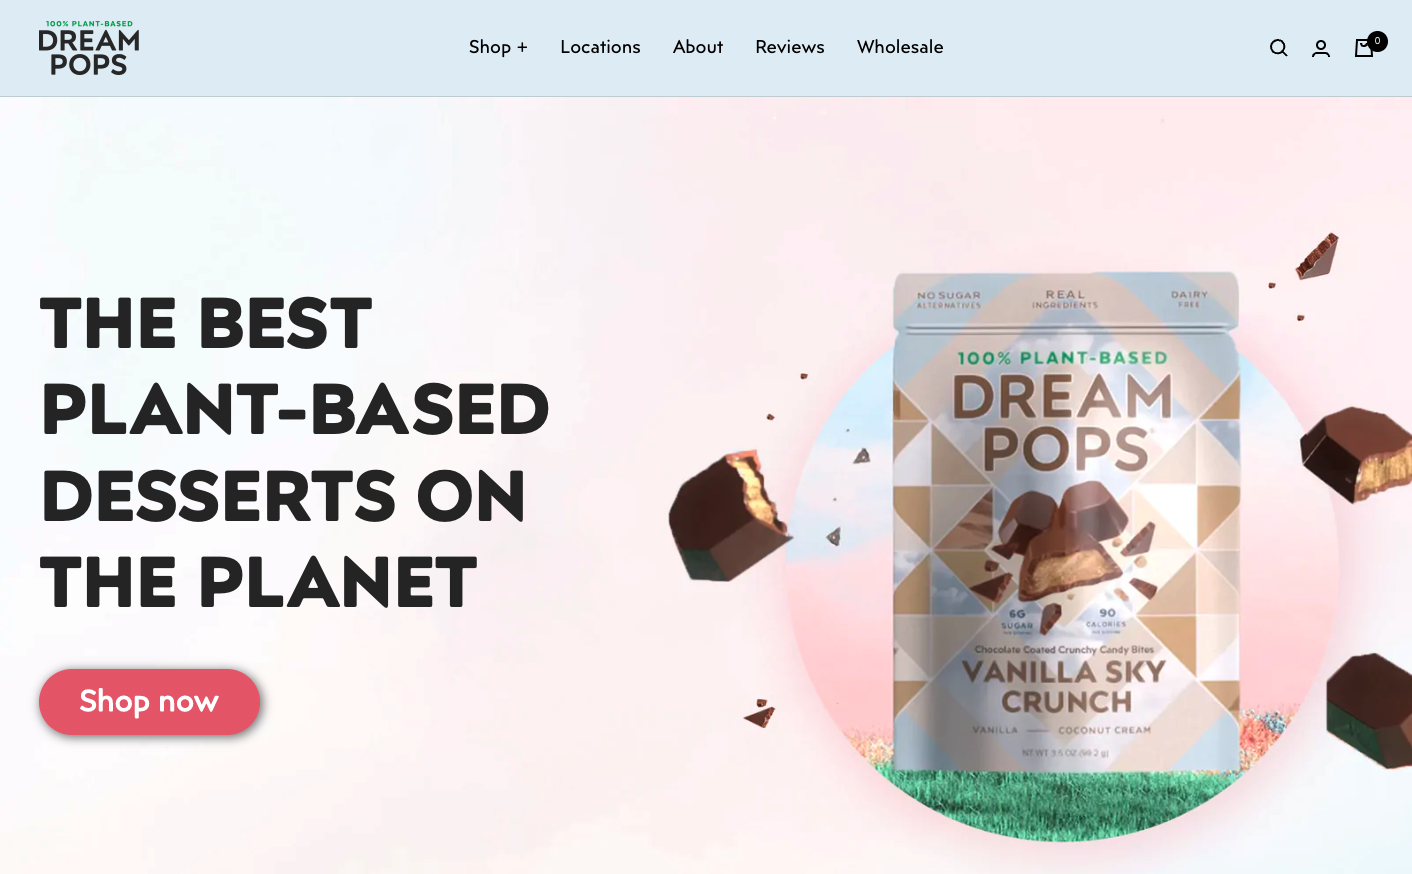 Large text on left, 'The Best Plant-Base Desserts on the Planet' and image of Vanilla Sky Crunch packet on right.